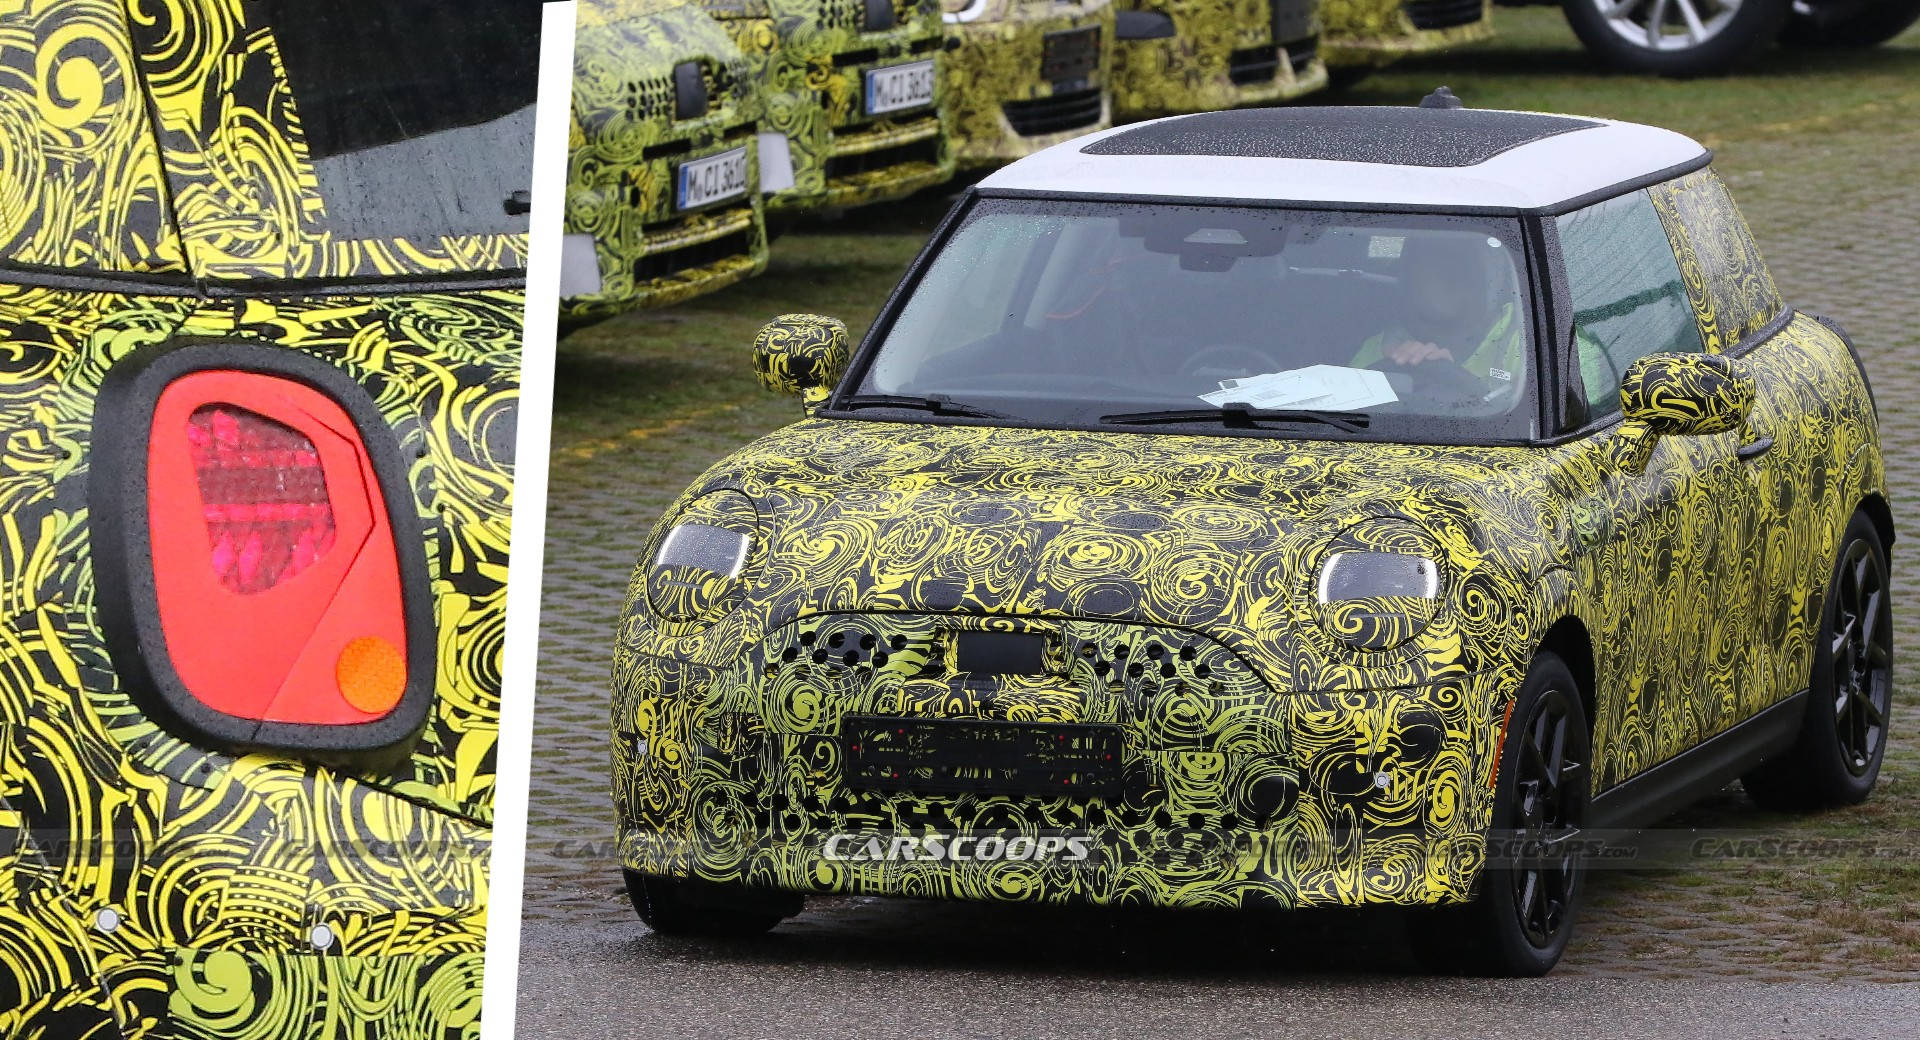 A vibrant Mini Cooper painted in green and black art pattern Wallpaper